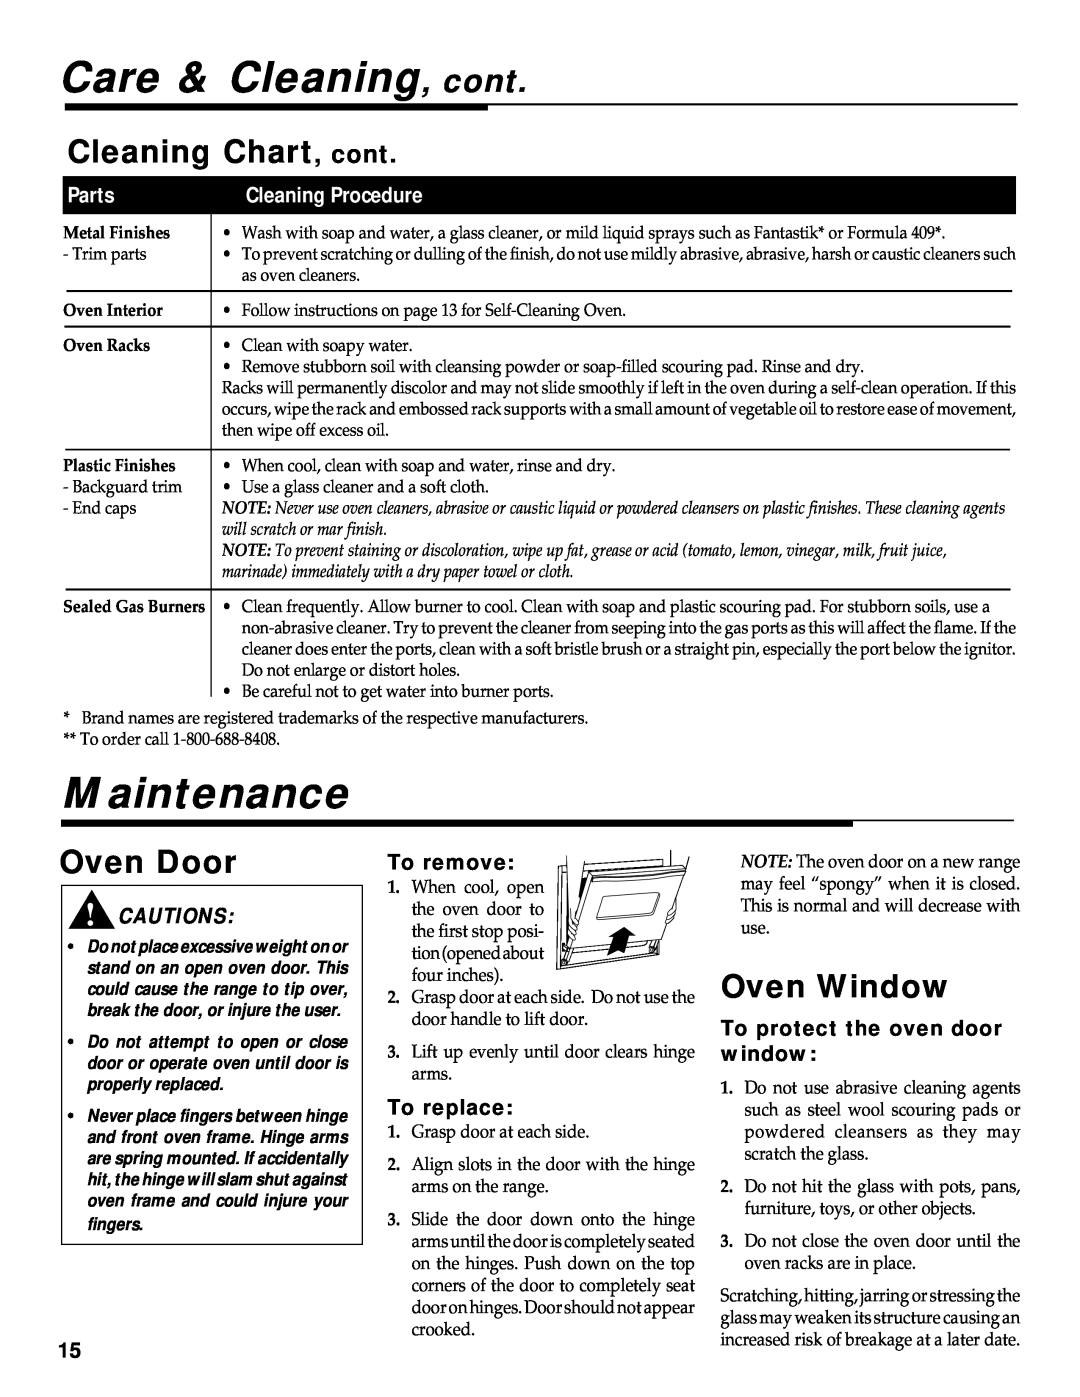 Maytag RS-1 Maintenance, Cleaning Chart, cont, Oven Door, Oven Window, Care & Cleaning, cont, Parts, Cleaning Procedure 